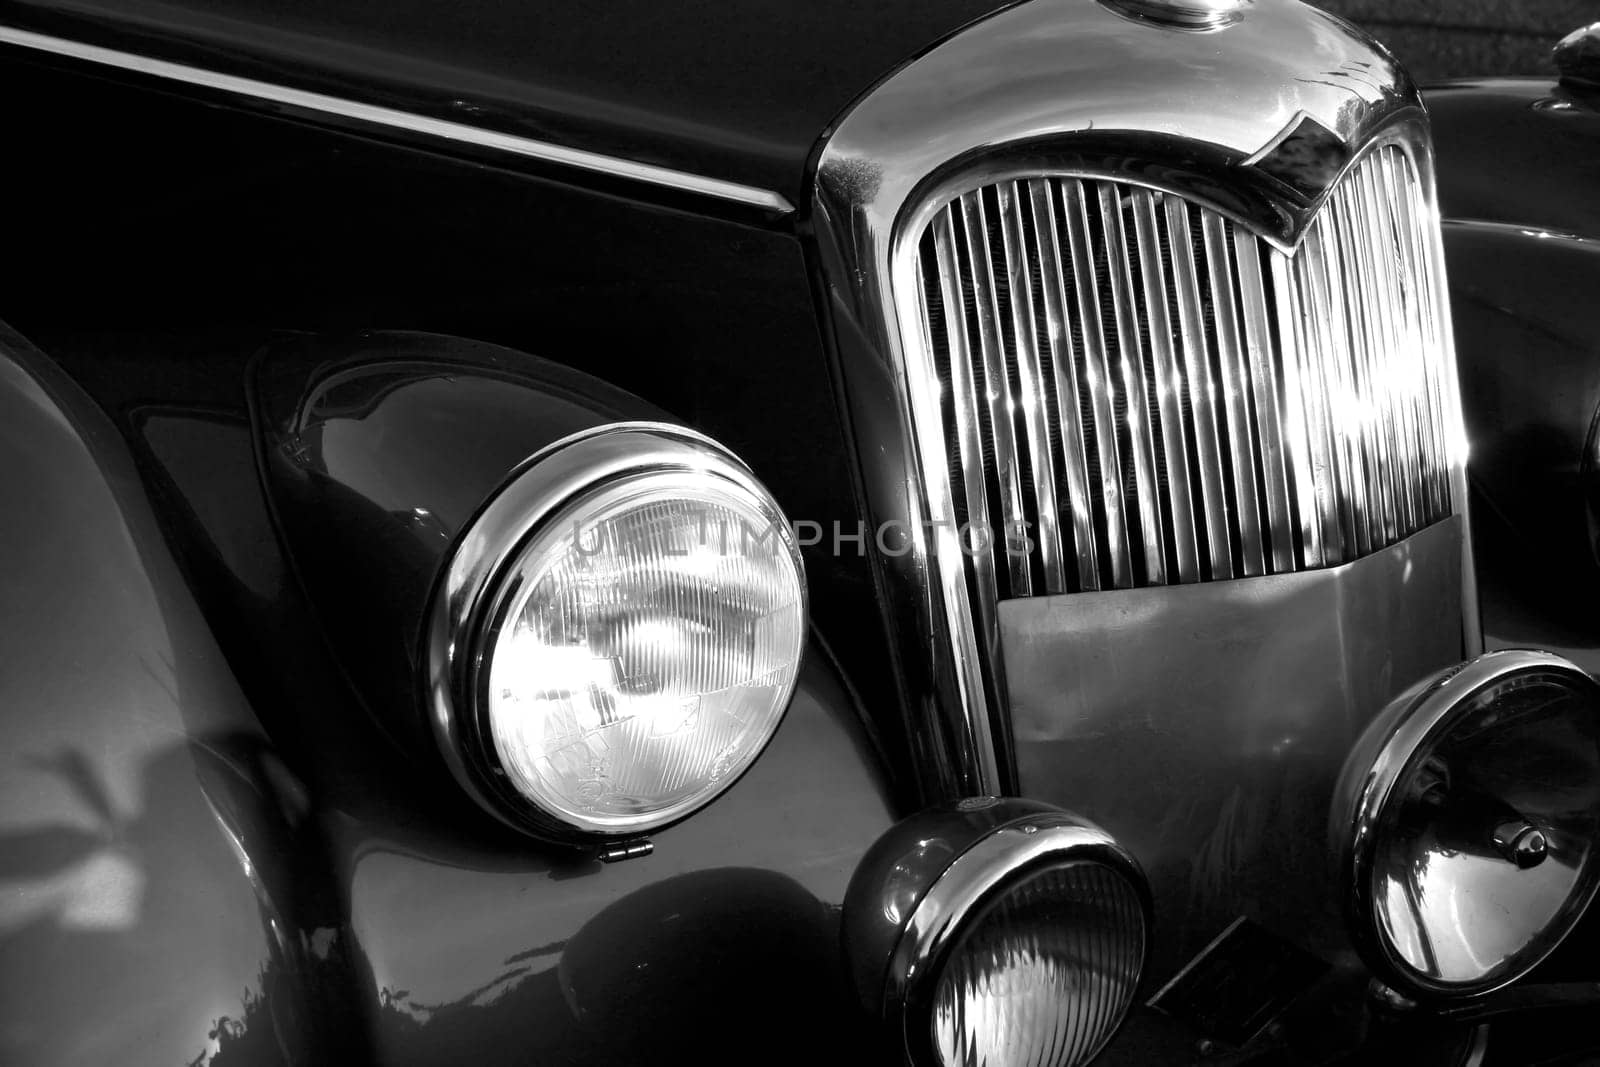 The front grill and headlight of the old beautiful car on the background copy space, card background by antoksena